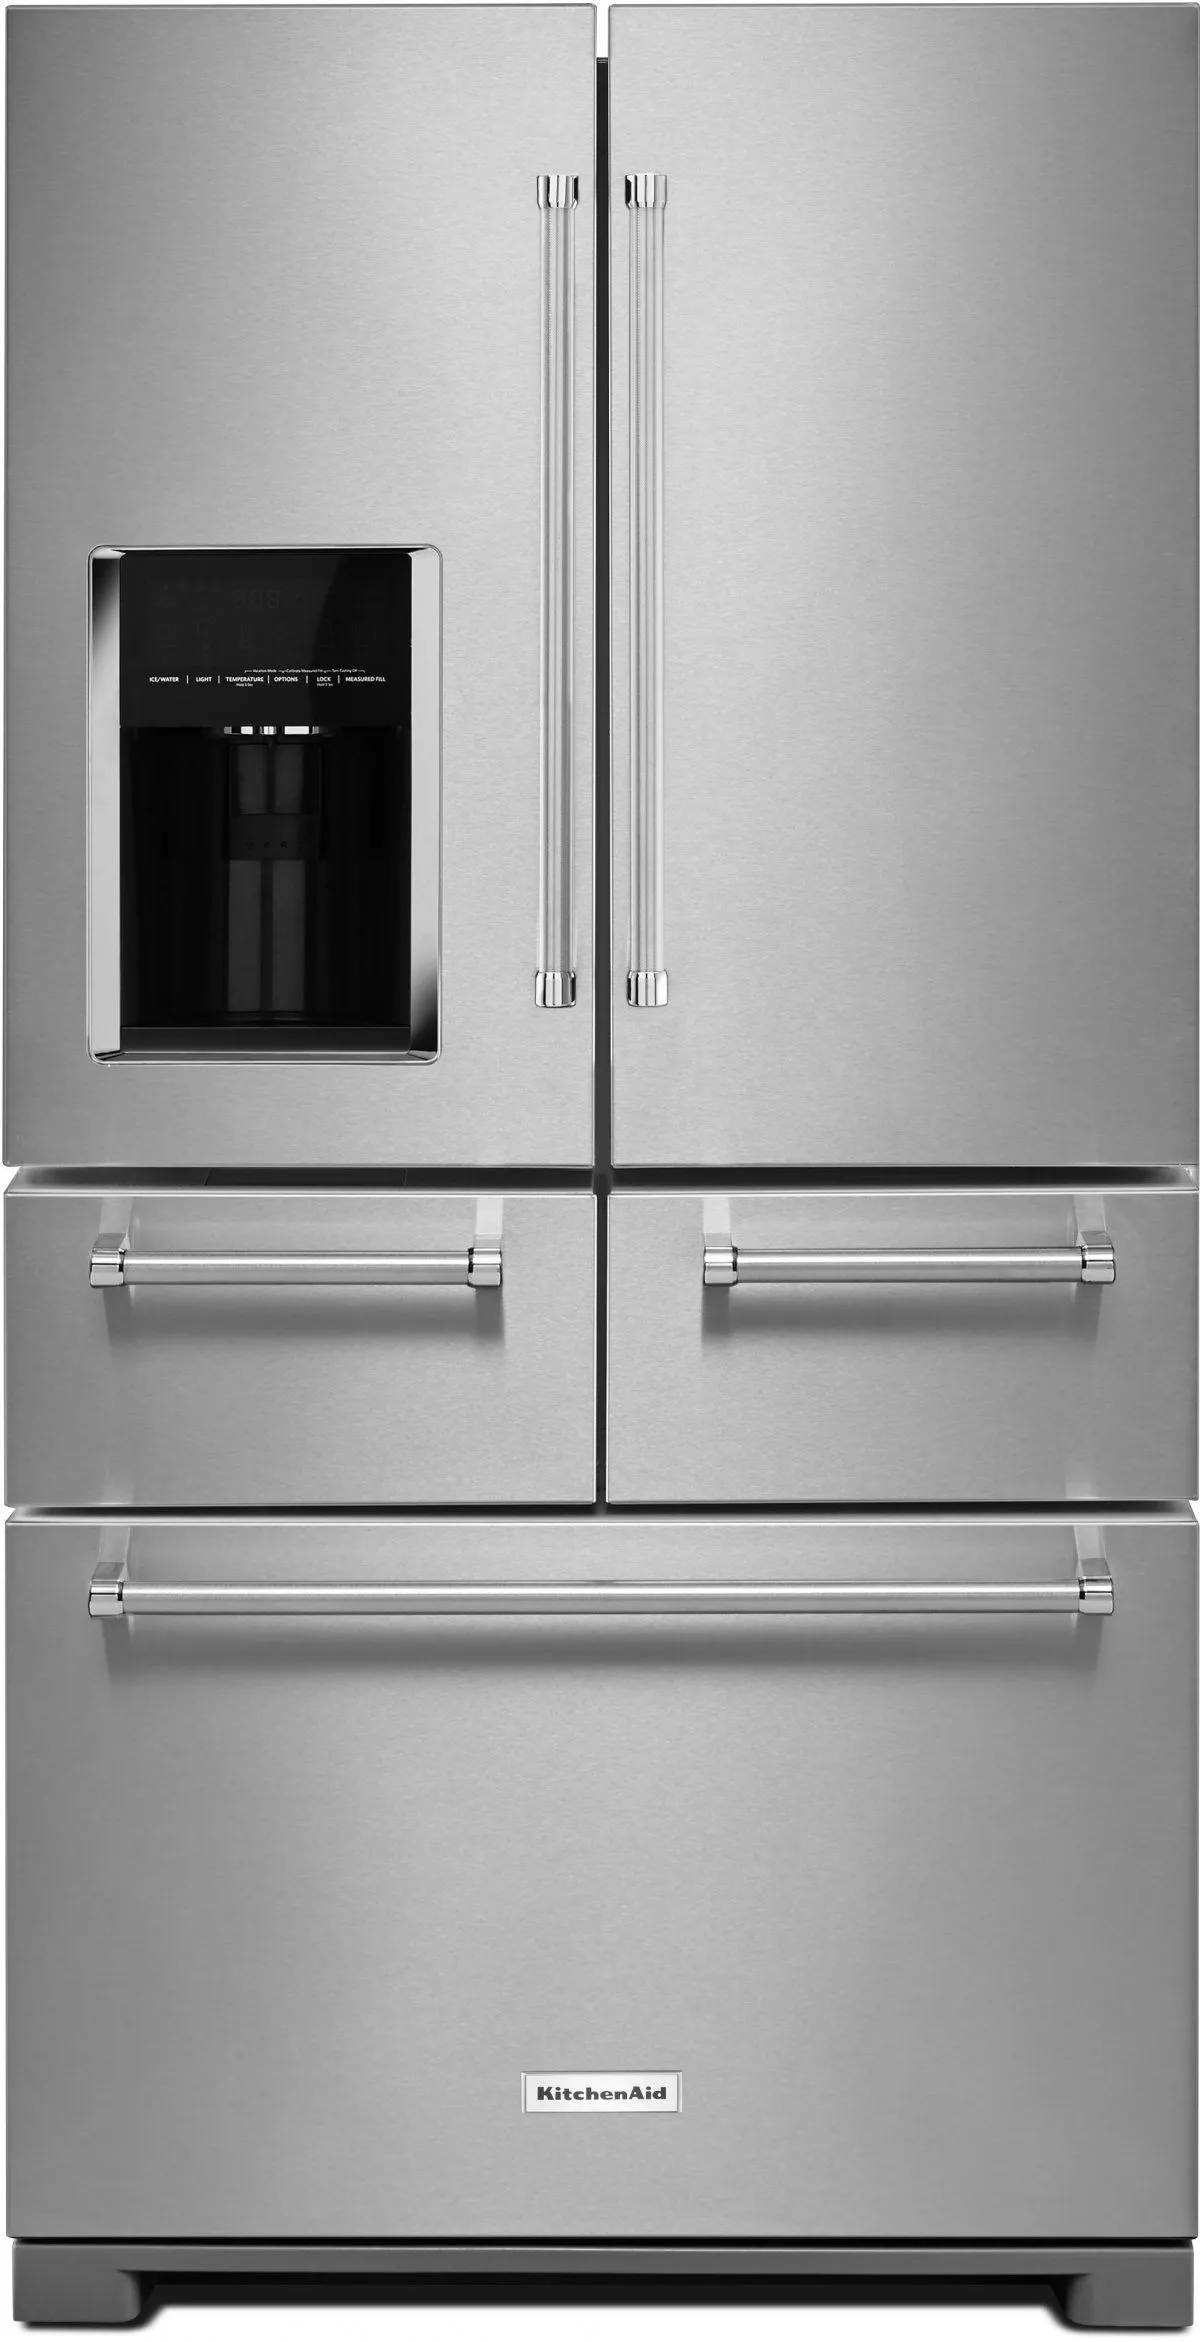 Front view of the KitchenAid KRMF706ESS French door refrigerator 